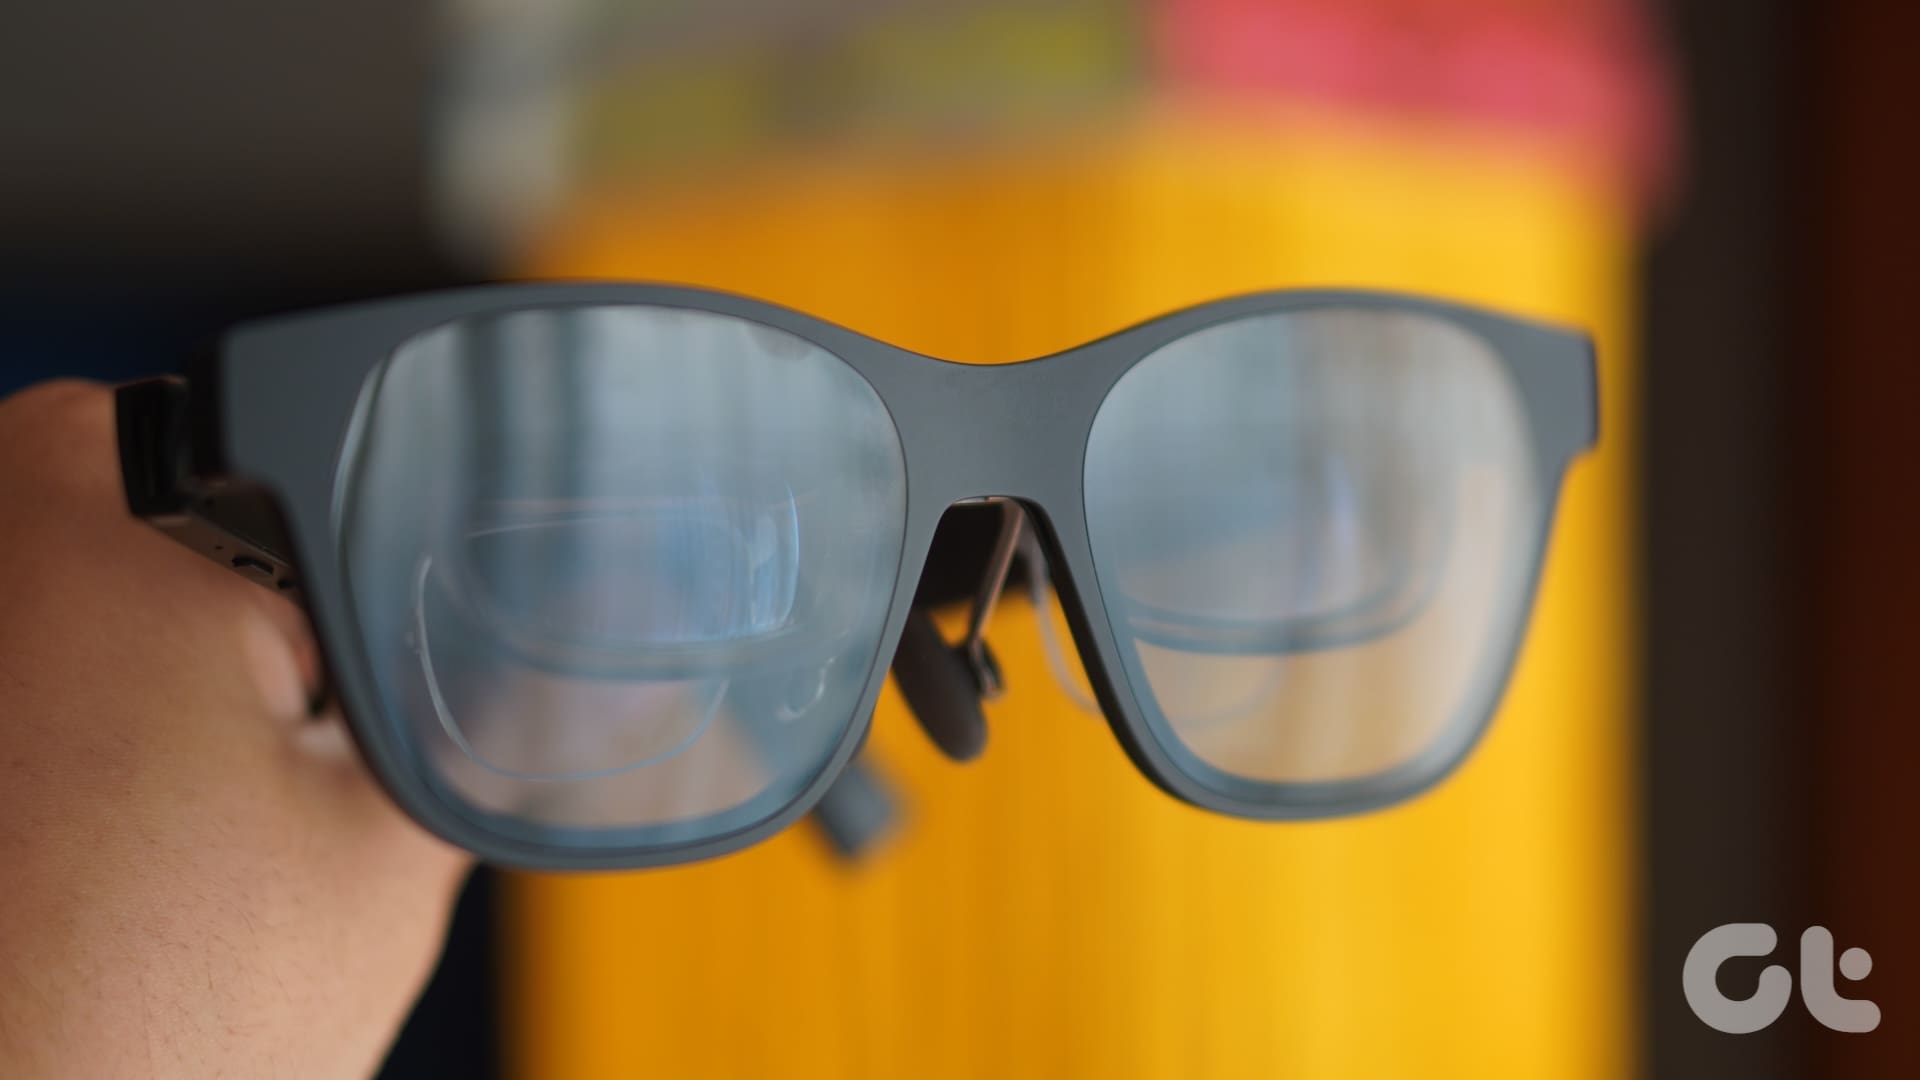 Xreal Air 2 Review: Refined AR Glasses That Barely Miss Their Mark